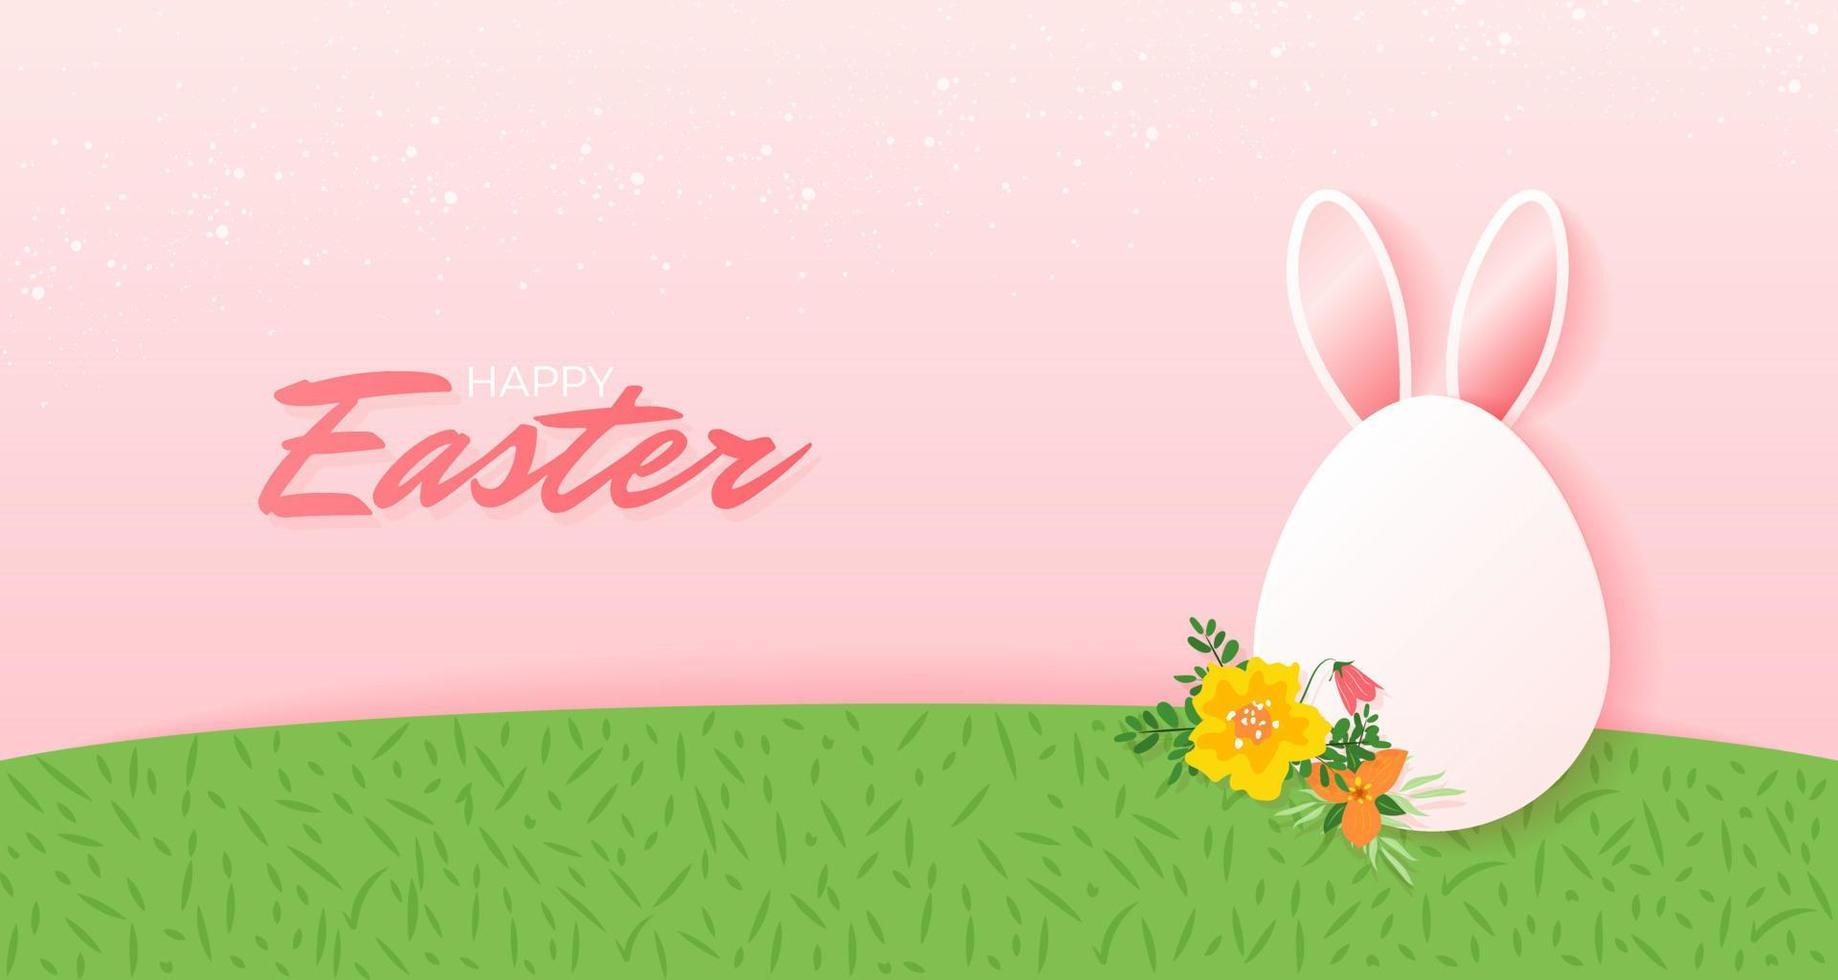 Vector card with cute Easter egg with rabbit ears and flowers on green field. Vector art in cartoon style. Happy Easter greeting card, poster, banner template.